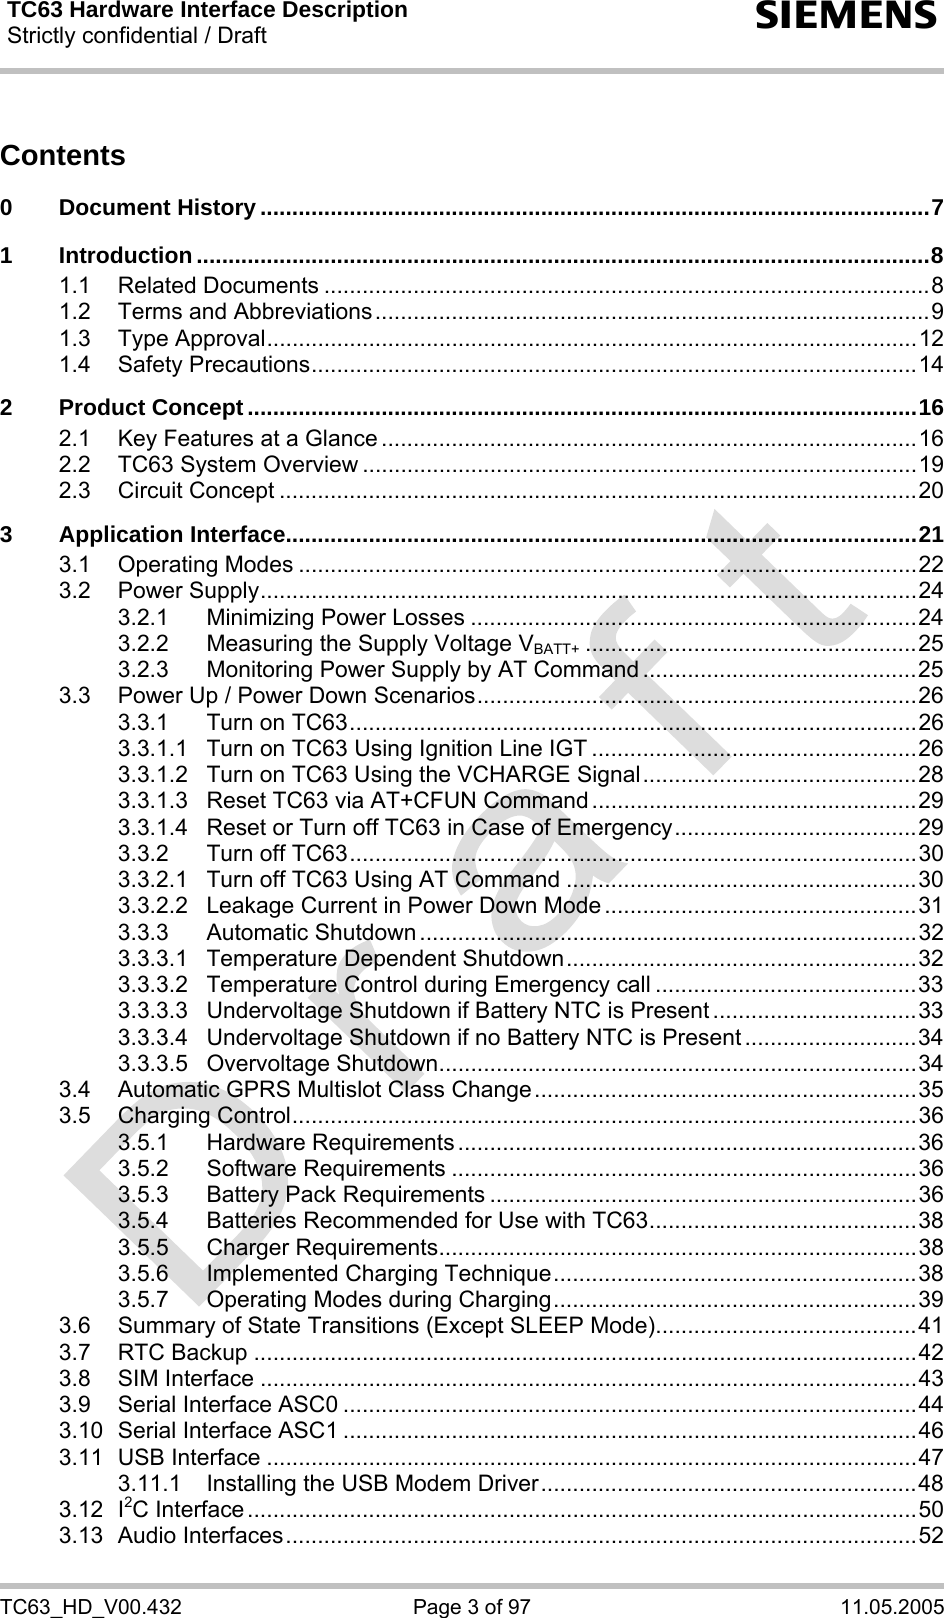 TC63 Hardware Interface Description Strictly confidential / Draft  s TC63_HD_V00.432  Page 3 of 97  11.05.2005 Contents  0 Document History .........................................................................................................7 1 Introduction...................................................................................................................8 1.1 Related Documents ...............................................................................................8 1.2 Terms and Abbreviations.......................................................................................9 1.3 Type Approval......................................................................................................12 1.4 Safety Precautions...............................................................................................14 2 Product Concept .........................................................................................................16 2.1 Key Features at a Glance ....................................................................................16 2.2 TC63 System Overview .......................................................................................19 2.3 Circuit Concept ....................................................................................................20 3 Application Interface...................................................................................................21 3.1 Operating Modes .................................................................................................22 3.2 Power Supply.......................................................................................................24 3.2.1 Minimizing Power Losses ......................................................................24 3.2.2 Measuring the Supply Voltage VBATT+ ....................................................25 3.2.3 Monitoring Power Supply by AT Command ...........................................25 3.3 Power Up / Power Down Scenarios.....................................................................26 3.3.1 Turn on TC63.........................................................................................26 3.3.1.1 Turn on TC63 Using Ignition Line IGT ...................................................26 3.3.1.2 Turn on TC63 Using the VCHARGE Signal...........................................28 3.3.1.3 Reset TC63 via AT+CFUN Command ...................................................29 3.3.1.4 Reset or Turn off TC63 in Case of Emergency......................................29 3.3.2 Turn off TC63.........................................................................................30 3.3.2.1 Turn off TC63 Using AT Command .......................................................30 3.3.2.2 Leakage Current in Power Down Mode .................................................31 3.3.3 Automatic Shutdown ..............................................................................32 3.3.3.1 Temperature Dependent Shutdown.......................................................32 3.3.3.2 Temperature Control during Emergency call .........................................33 3.3.3.3 Undervoltage Shutdown if Battery NTC is Present ................................33 3.3.3.4 Undervoltage Shutdown if no Battery NTC is Present ...........................34 3.3.3.5 Overvoltage Shutdown...........................................................................34 3.4 Automatic GPRS Multislot Class Change............................................................35 3.5 Charging Control..................................................................................................36 3.5.1 Hardware Requirements ........................................................................36 3.5.2 Software Requirements .........................................................................36 3.5.3 Battery Pack Requirements ...................................................................36 3.5.4 Batteries Recommended for Use with TC63..........................................38 3.5.5 Charger Requirements...........................................................................38 3.5.6 Implemented Charging Technique.........................................................38 3.5.7 Operating Modes during Charging.........................................................39 3.6 Summary of State Transitions (Except SLEEP Mode).........................................41 3.7 RTC Backup ........................................................................................................42 3.8 SIM Interface .......................................................................................................43 3.9 Serial Interface ASC0 ..........................................................................................44 3.10 Serial Interface ASC1 ..........................................................................................46 3.11 USB Interface ......................................................................................................47 3.11.1 Installing the USB Modem Driver...........................................................48 3.12 I2C Interface .........................................................................................................50 3.13 Audio Interfaces...................................................................................................52 